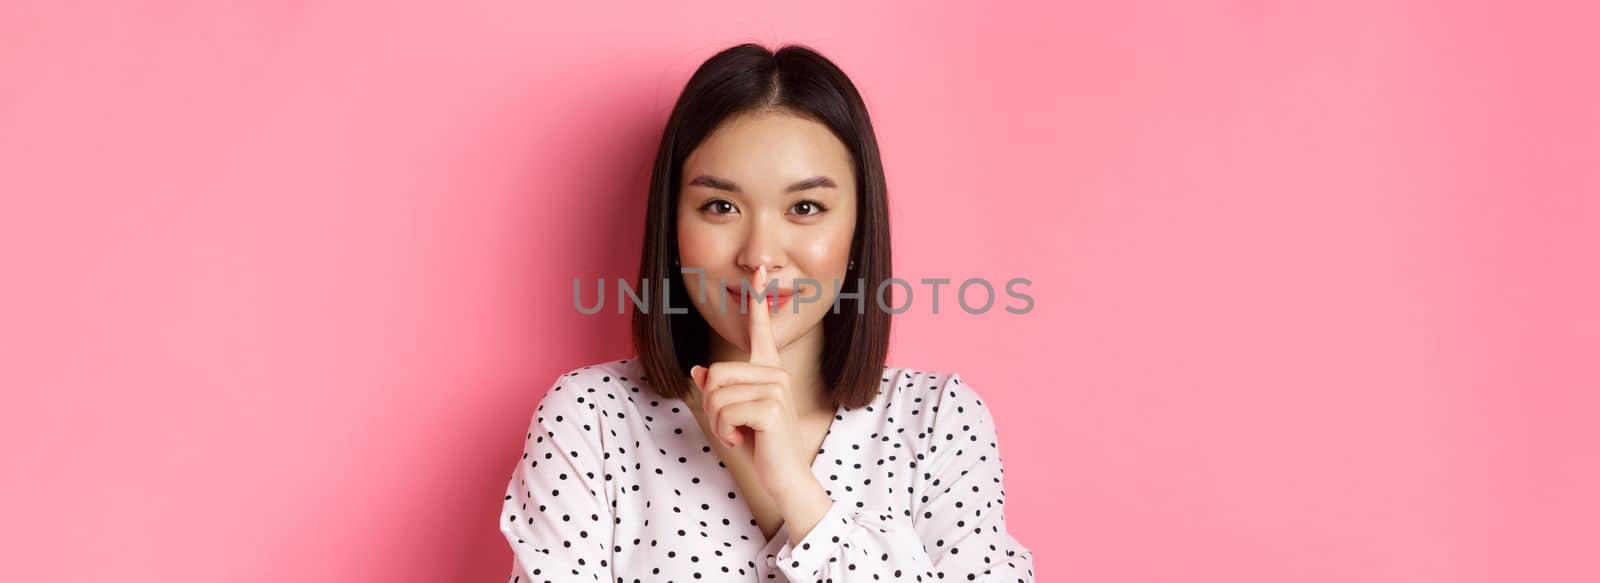 Close-up of mysterious asian woman hiding a secret, hushing and telling to keep quiet, standing over pink background.